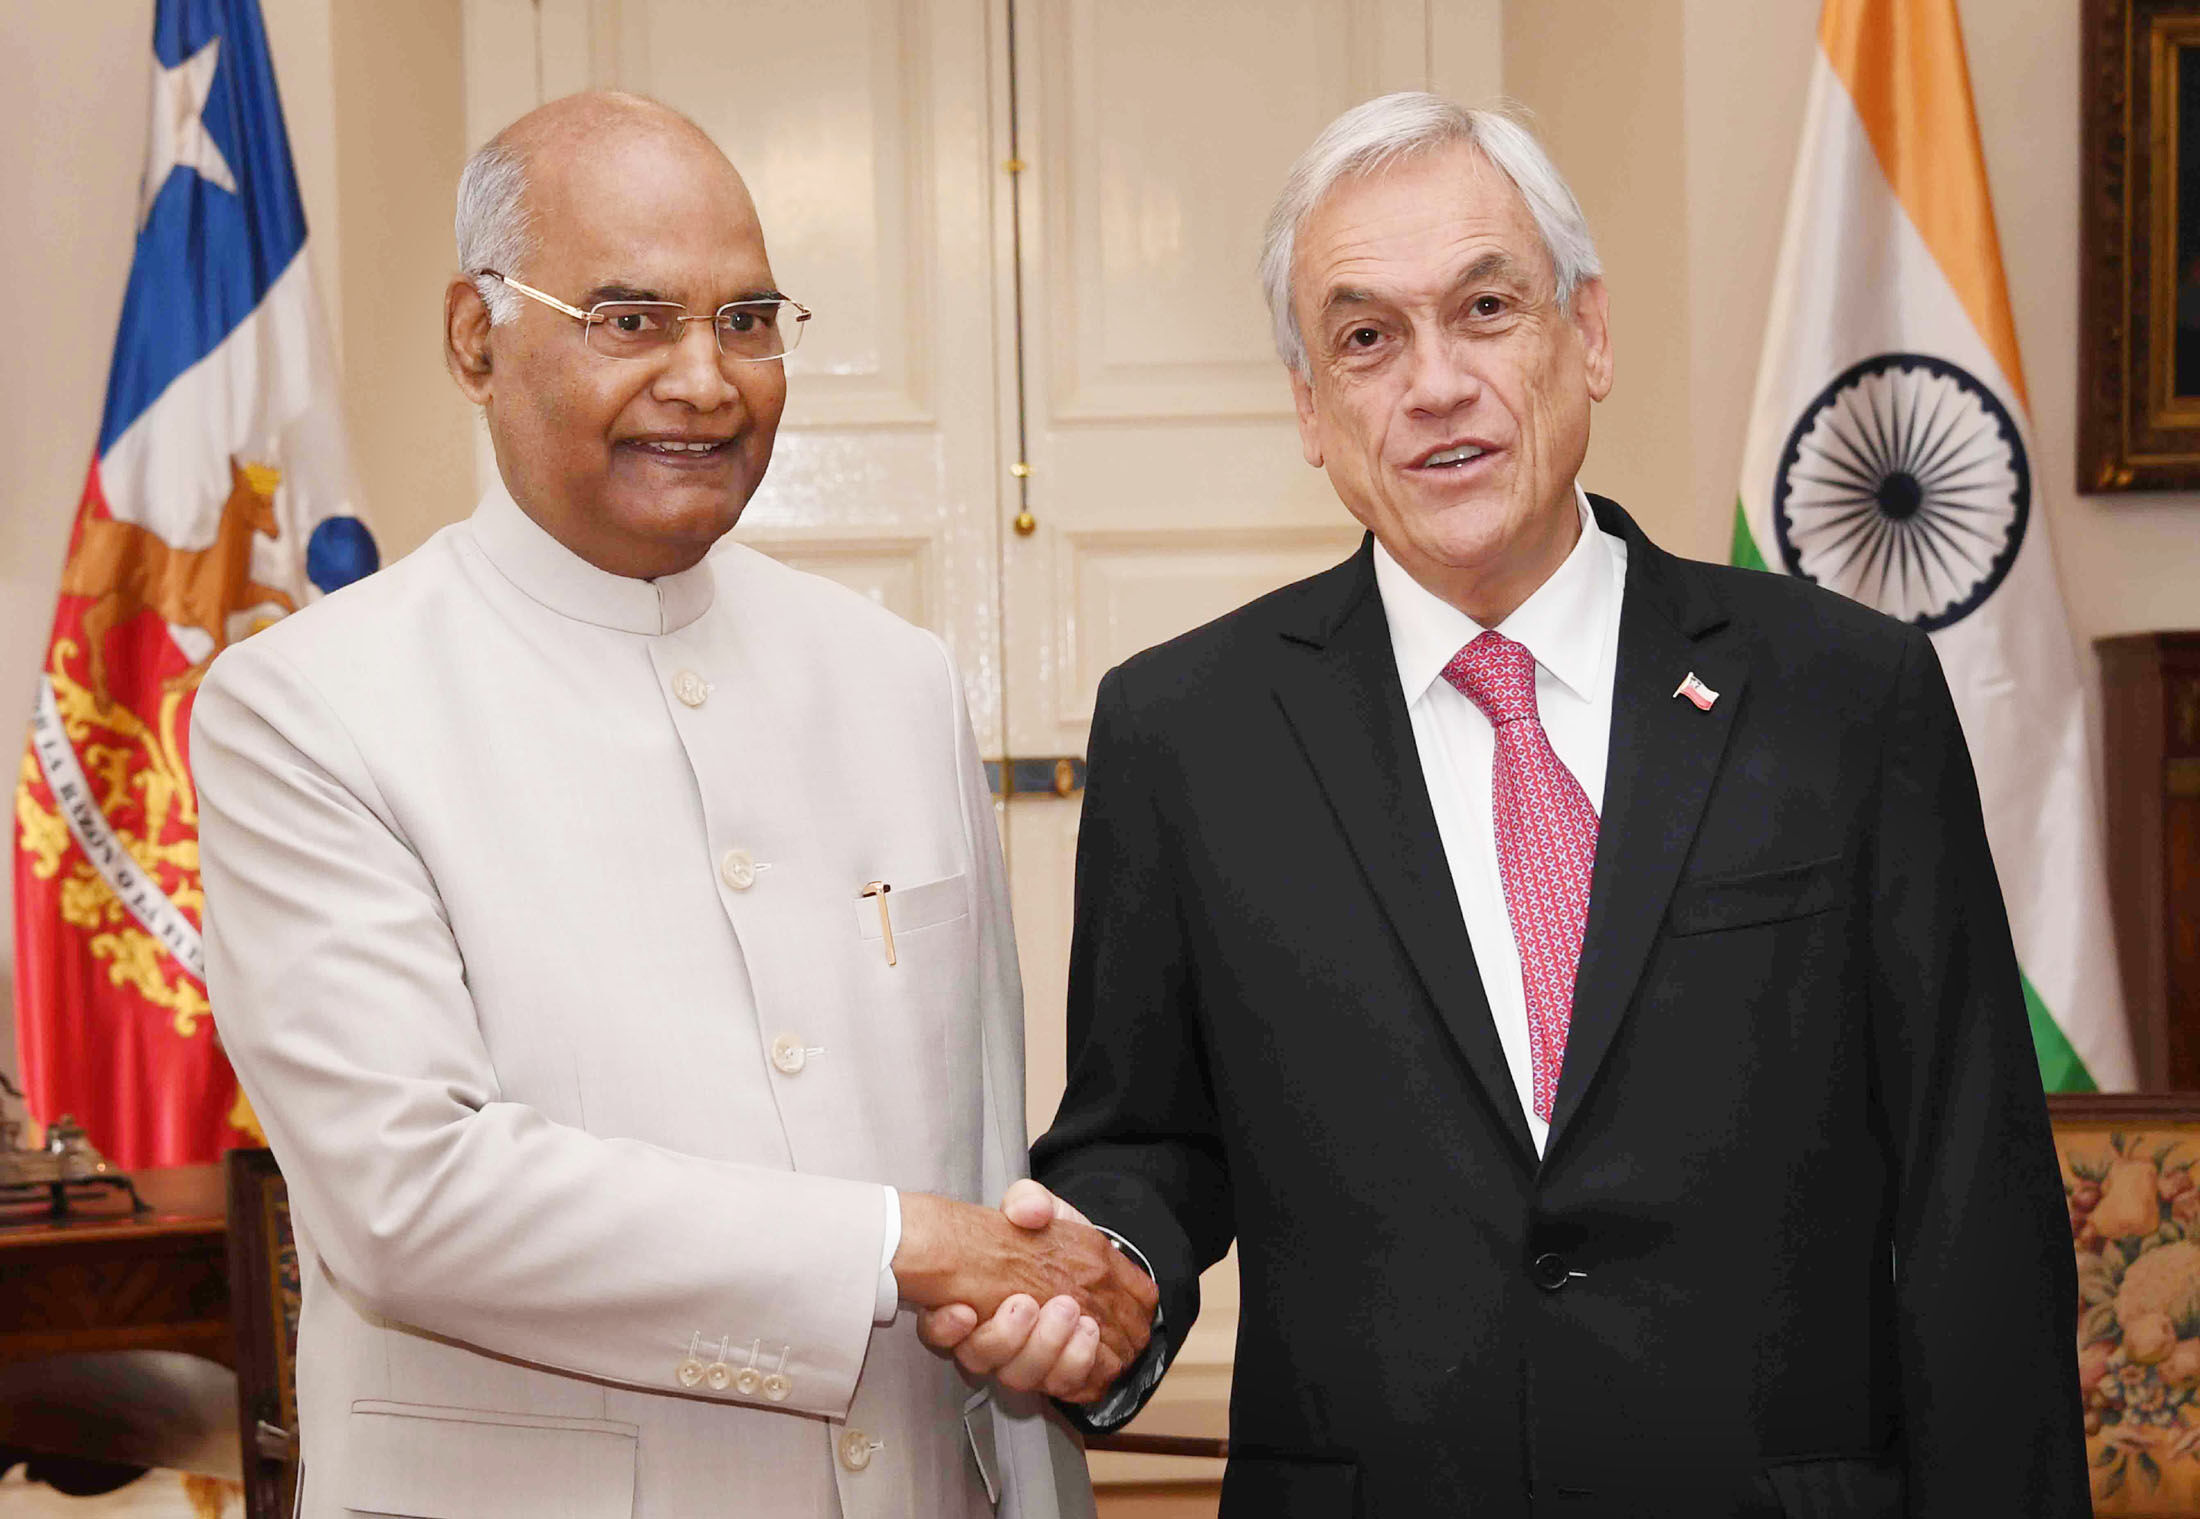 President of India in Chile; Leads Delegation Level Talks; Addresses India-Chile Business Forum as well as students at the University of Chile